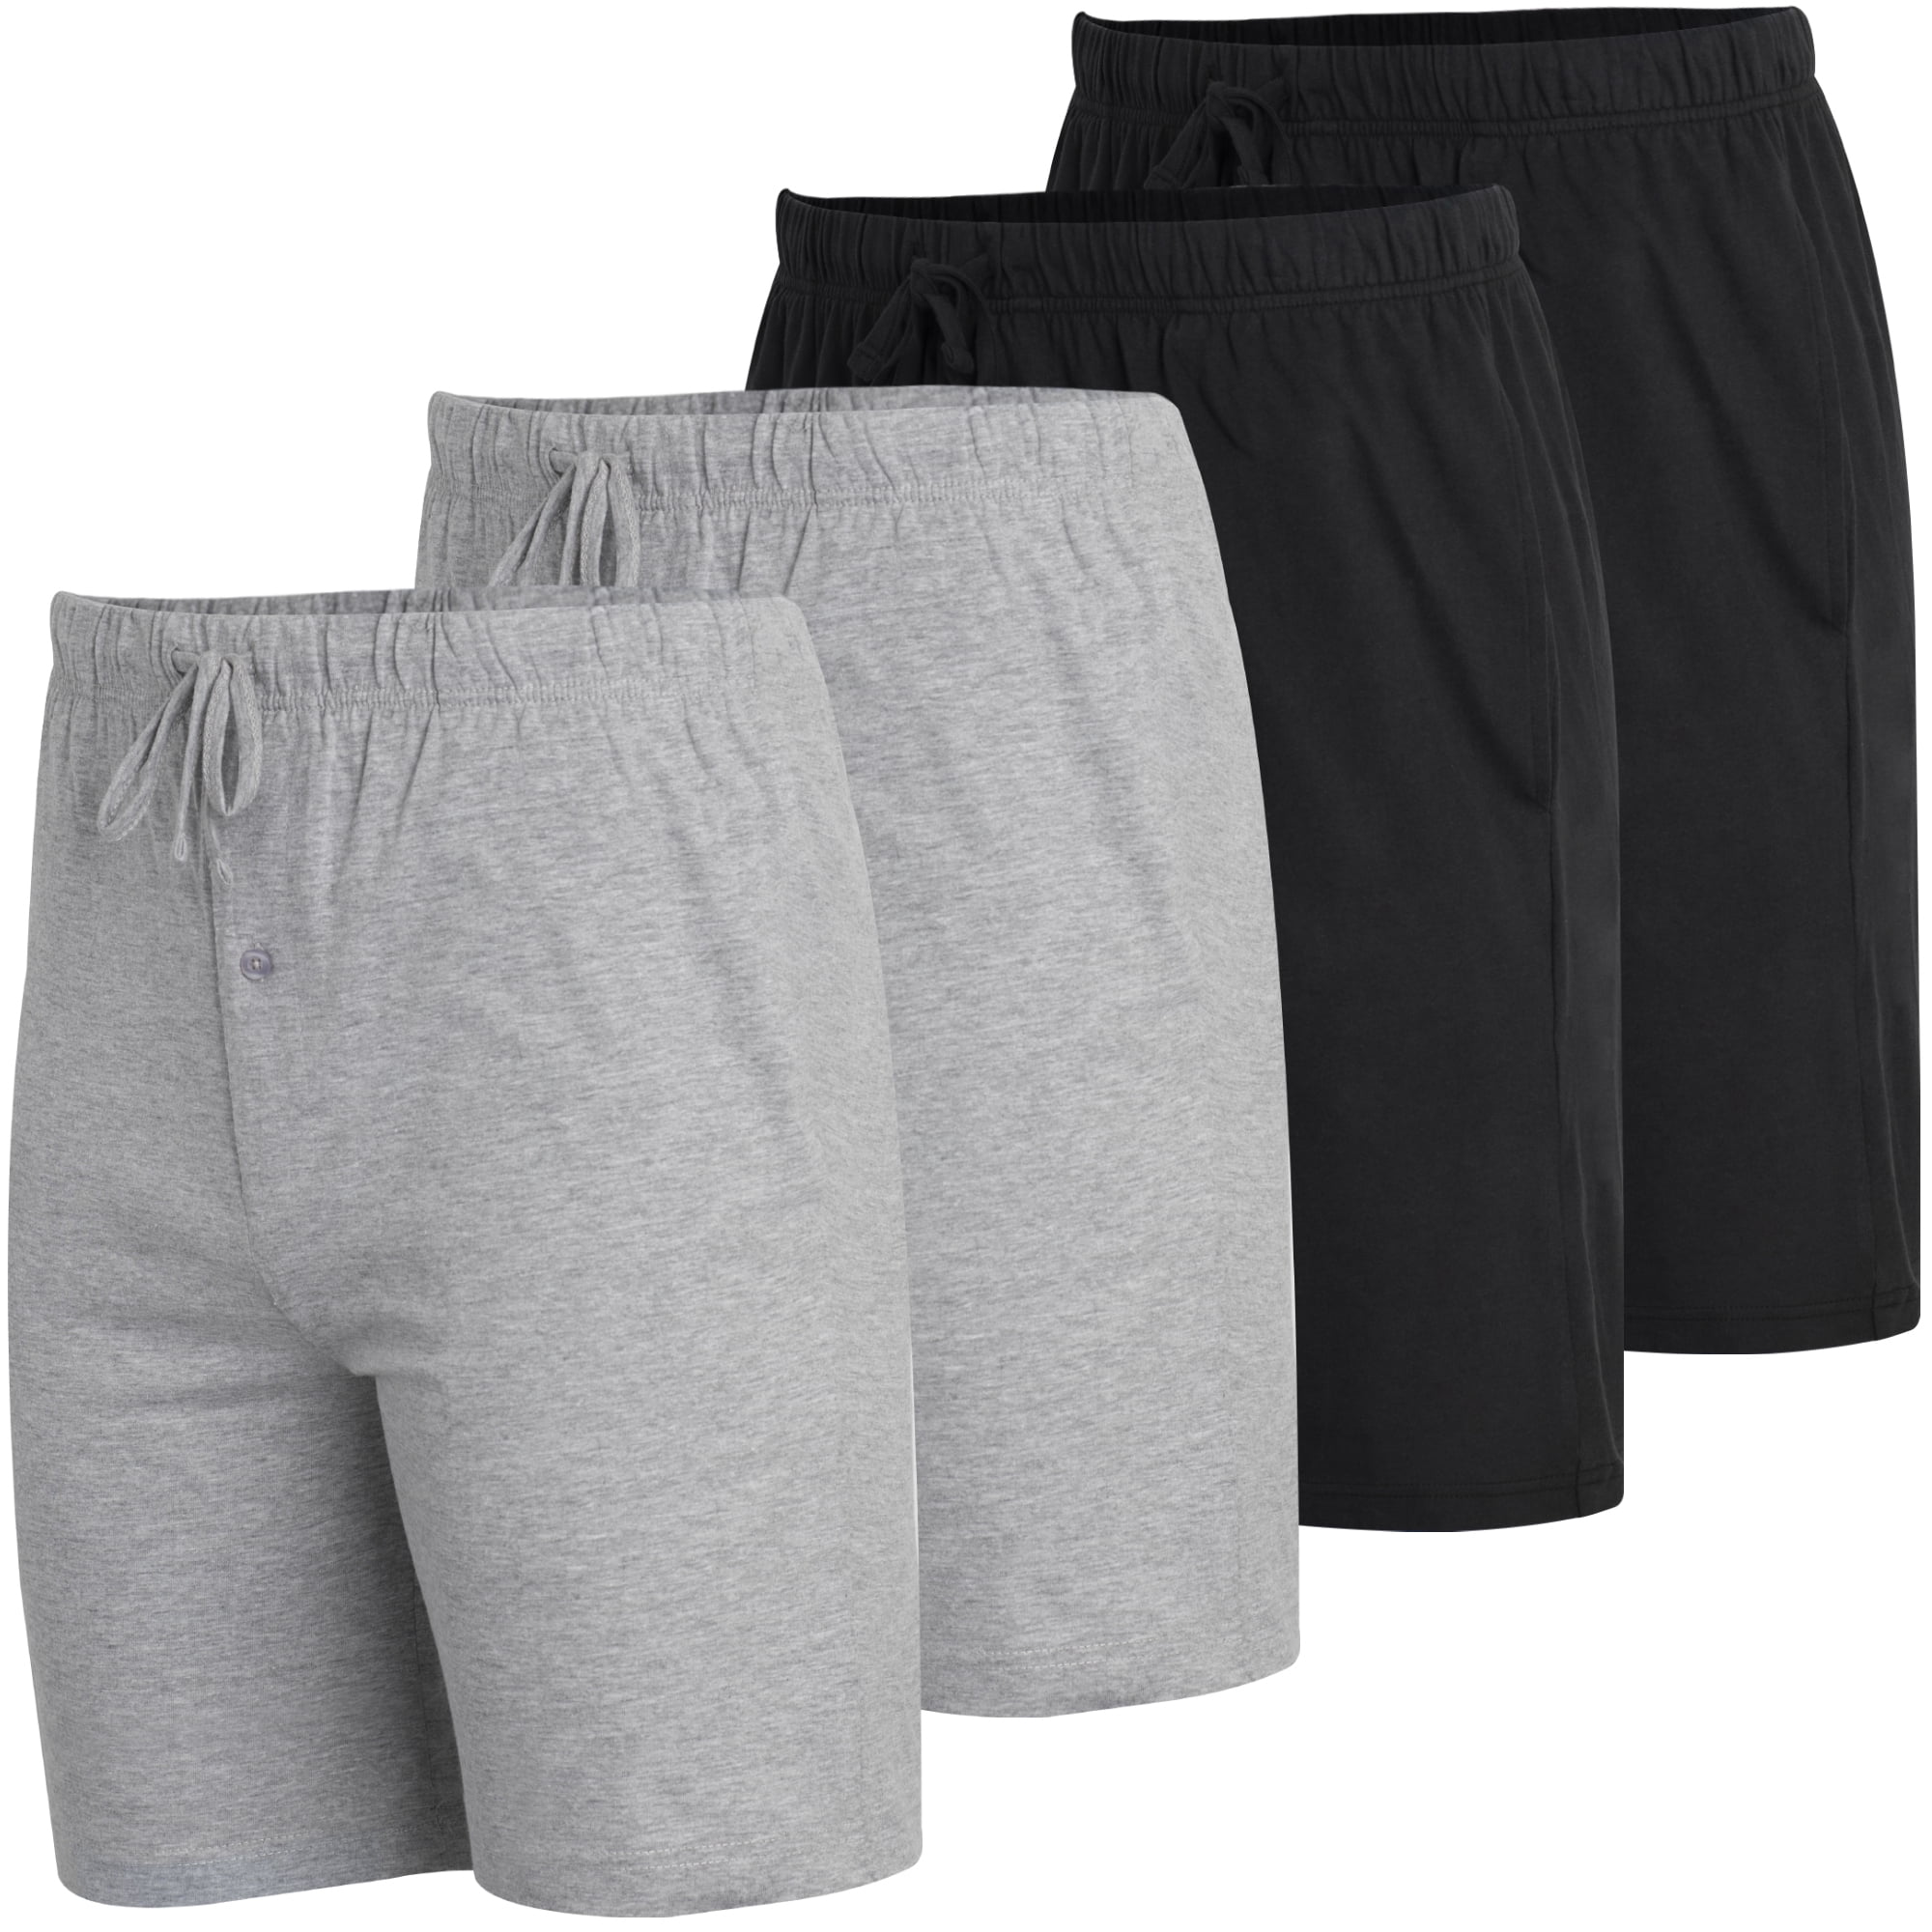 Real Essentials Men's 4-Pack Soft Knit Sleep Shorts, Sizes S-3XL, Mens  Pajamas 